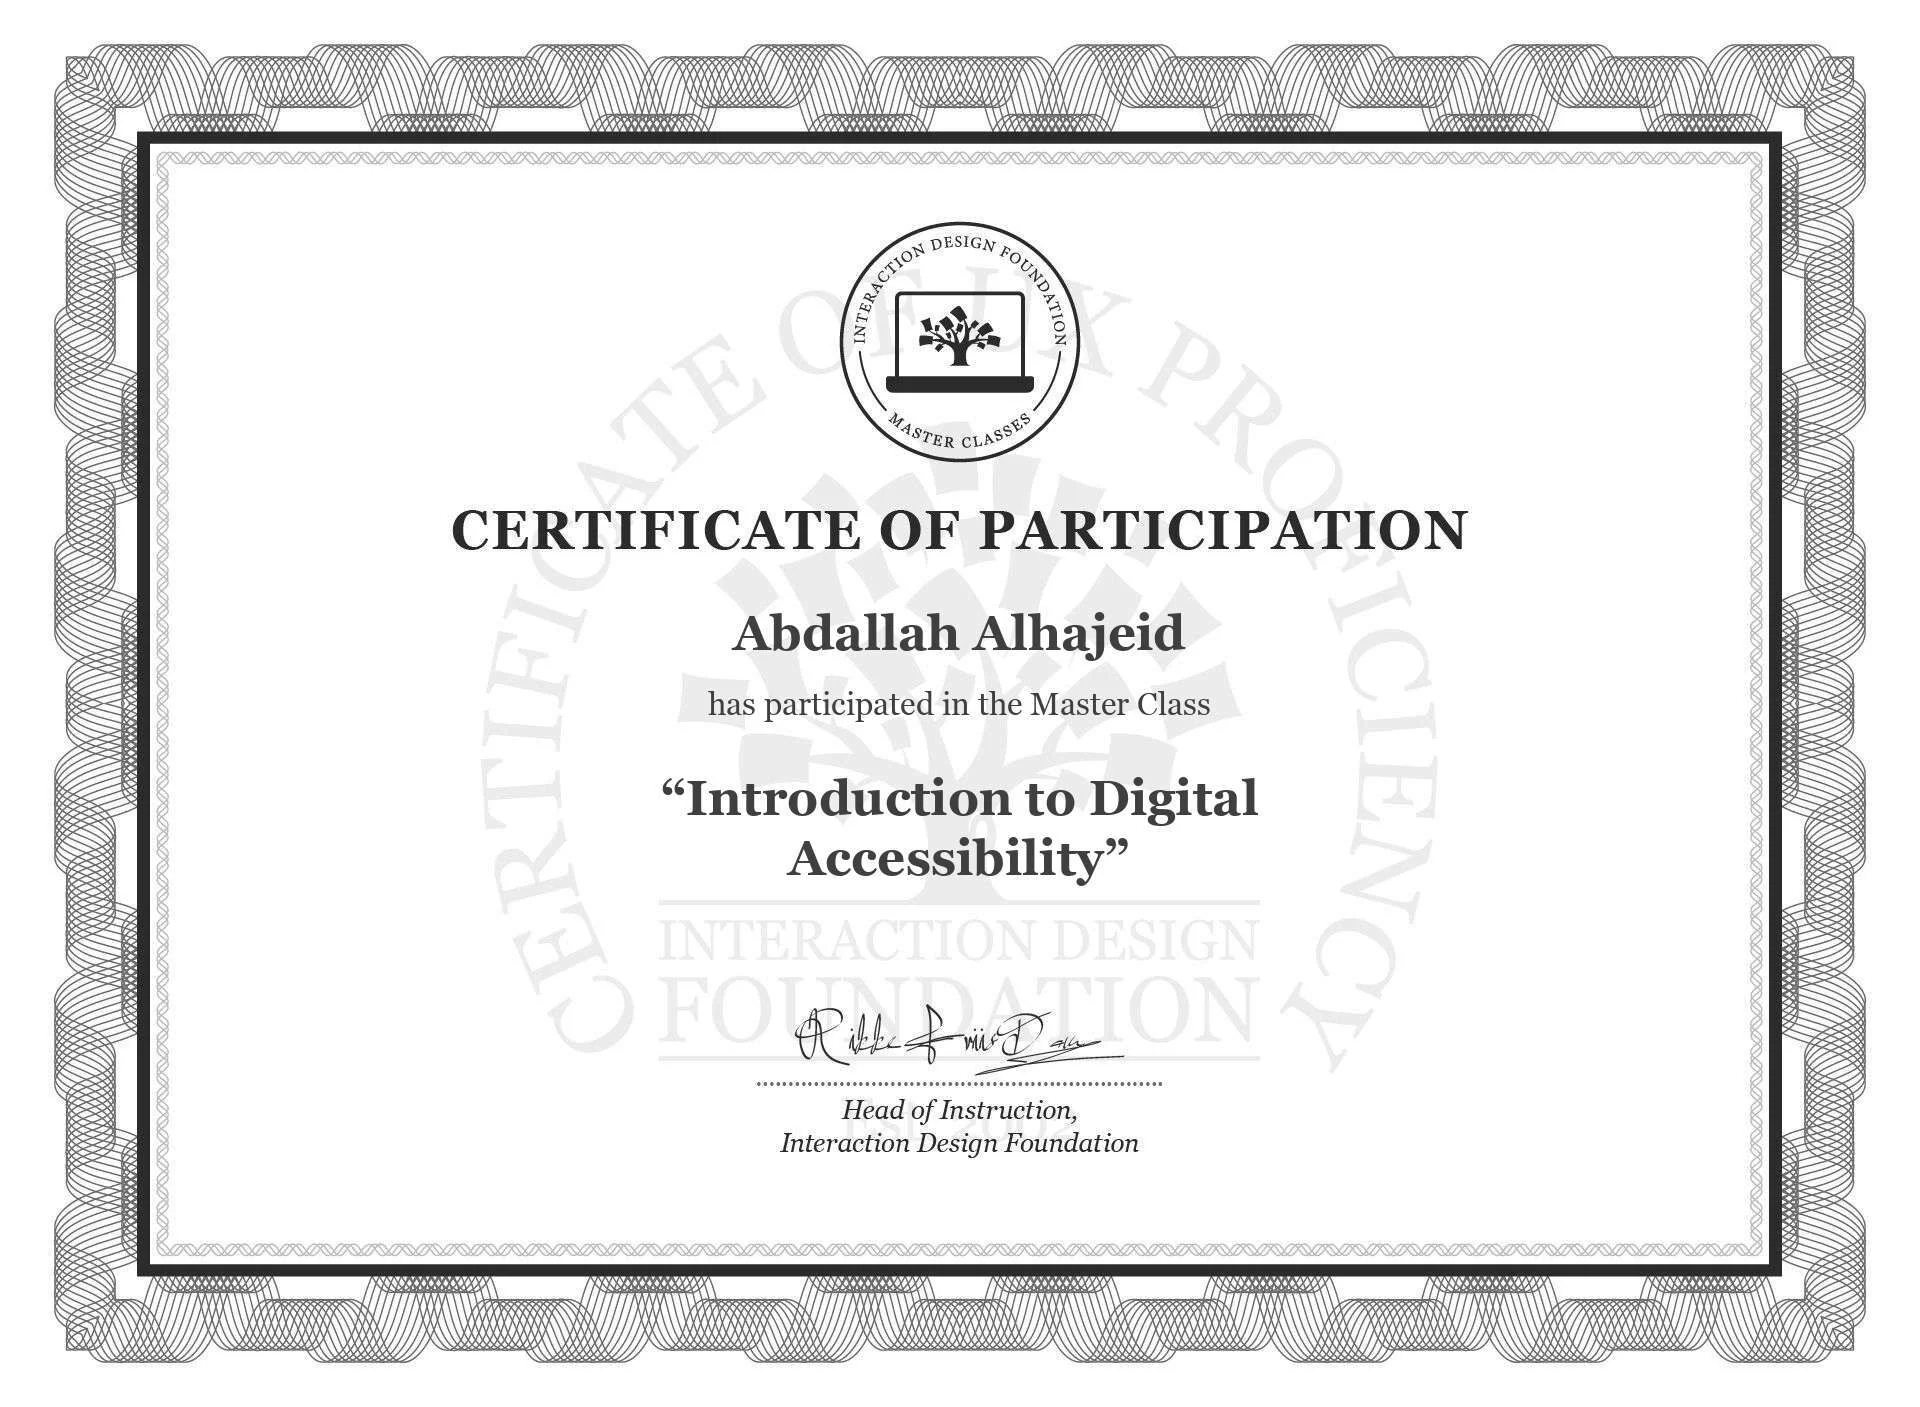 User Experience Introduction to Digital Accessibility